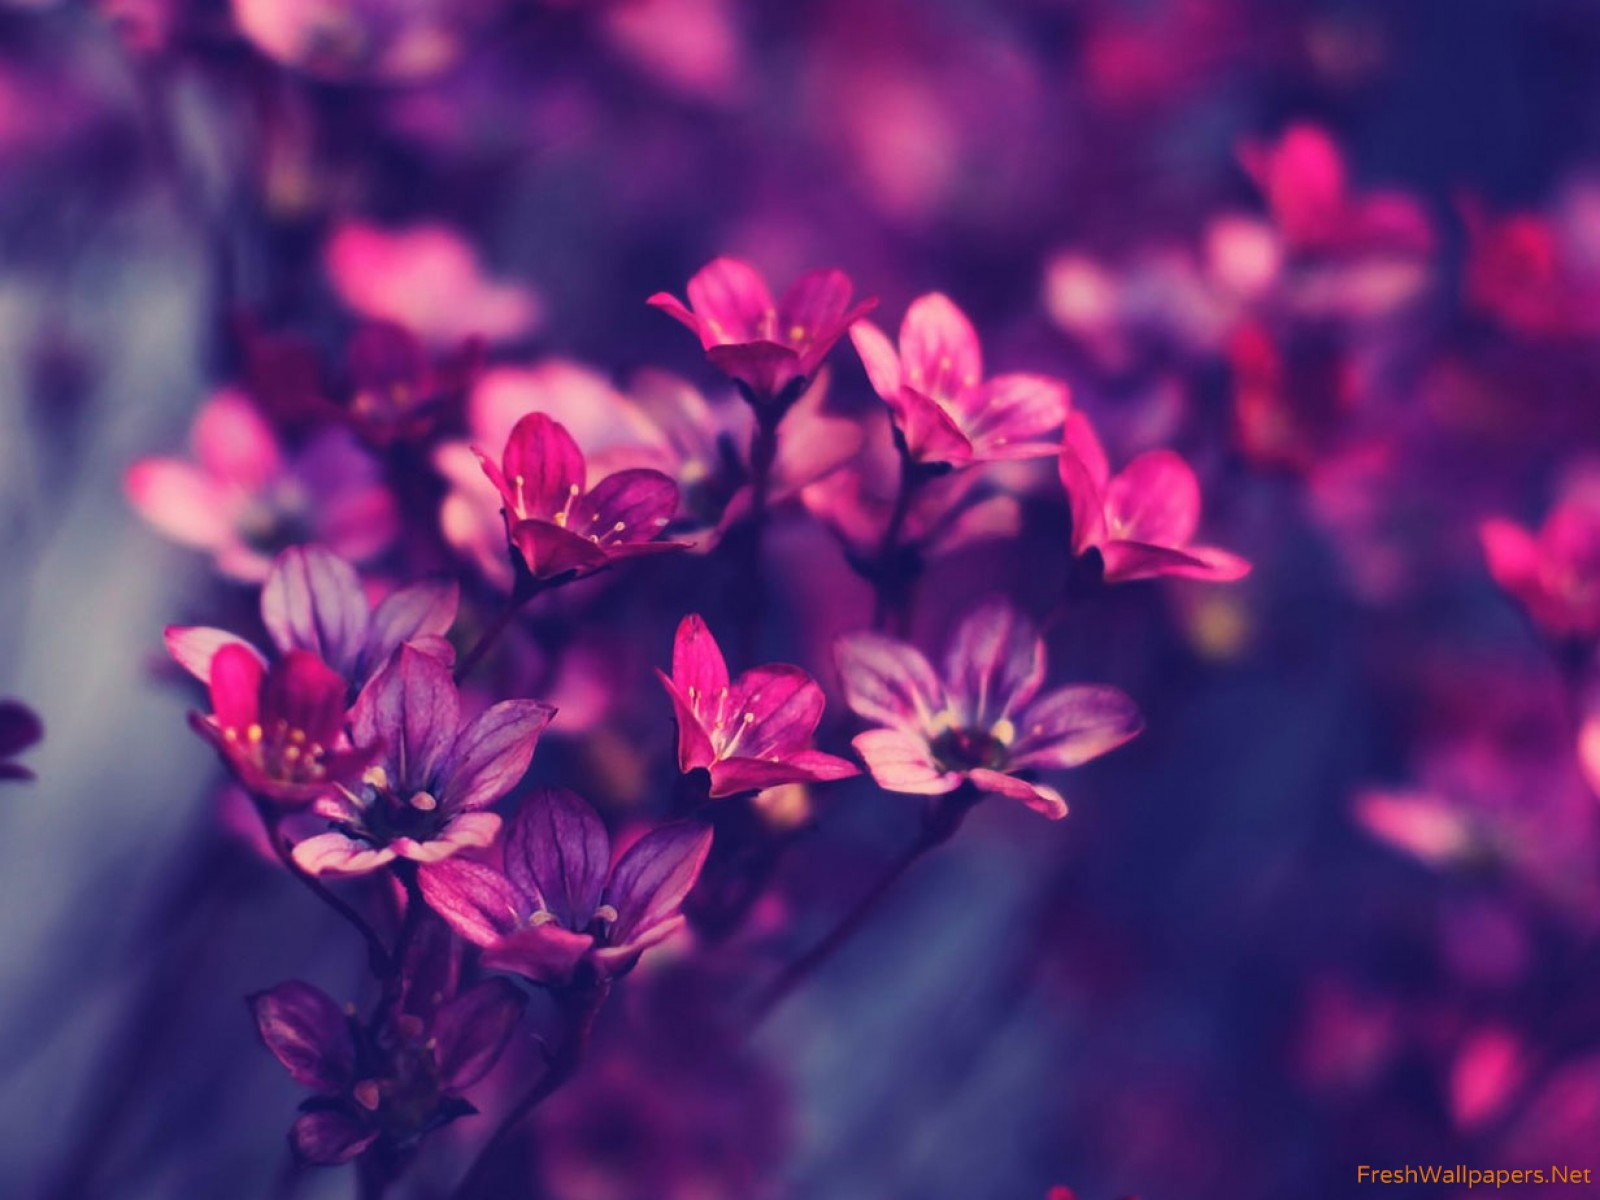 Flores Pics By Tirta Bice On Freshwall - Ipad Wallpaper Flowers , HD Wallpaper & Backgrounds